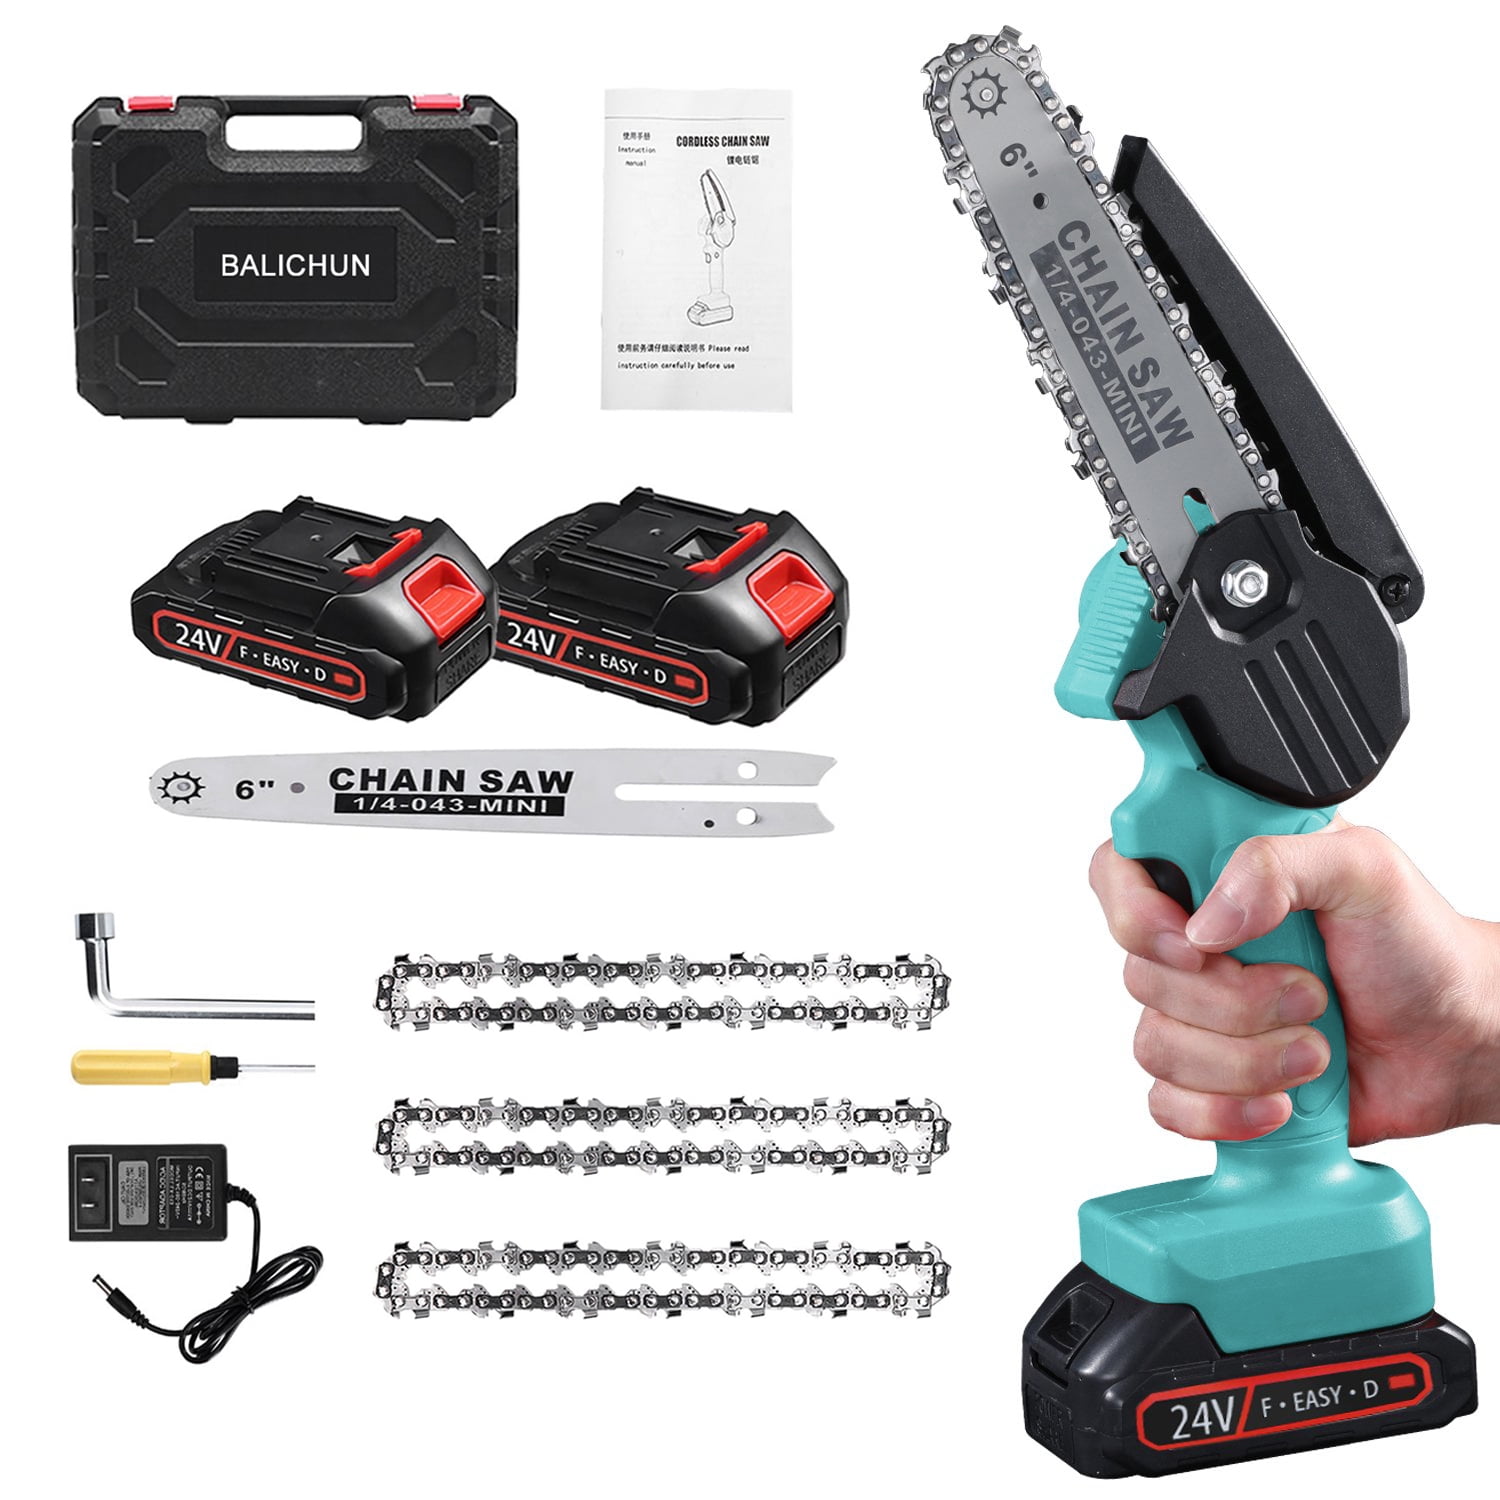 2 Batteries 2 Chains FOONSEN Mini Chainsaw battery powered Chainsaw for Wood Cutting 4“ Hand held Cordless Chain saw Tree Branches Shears Pruning